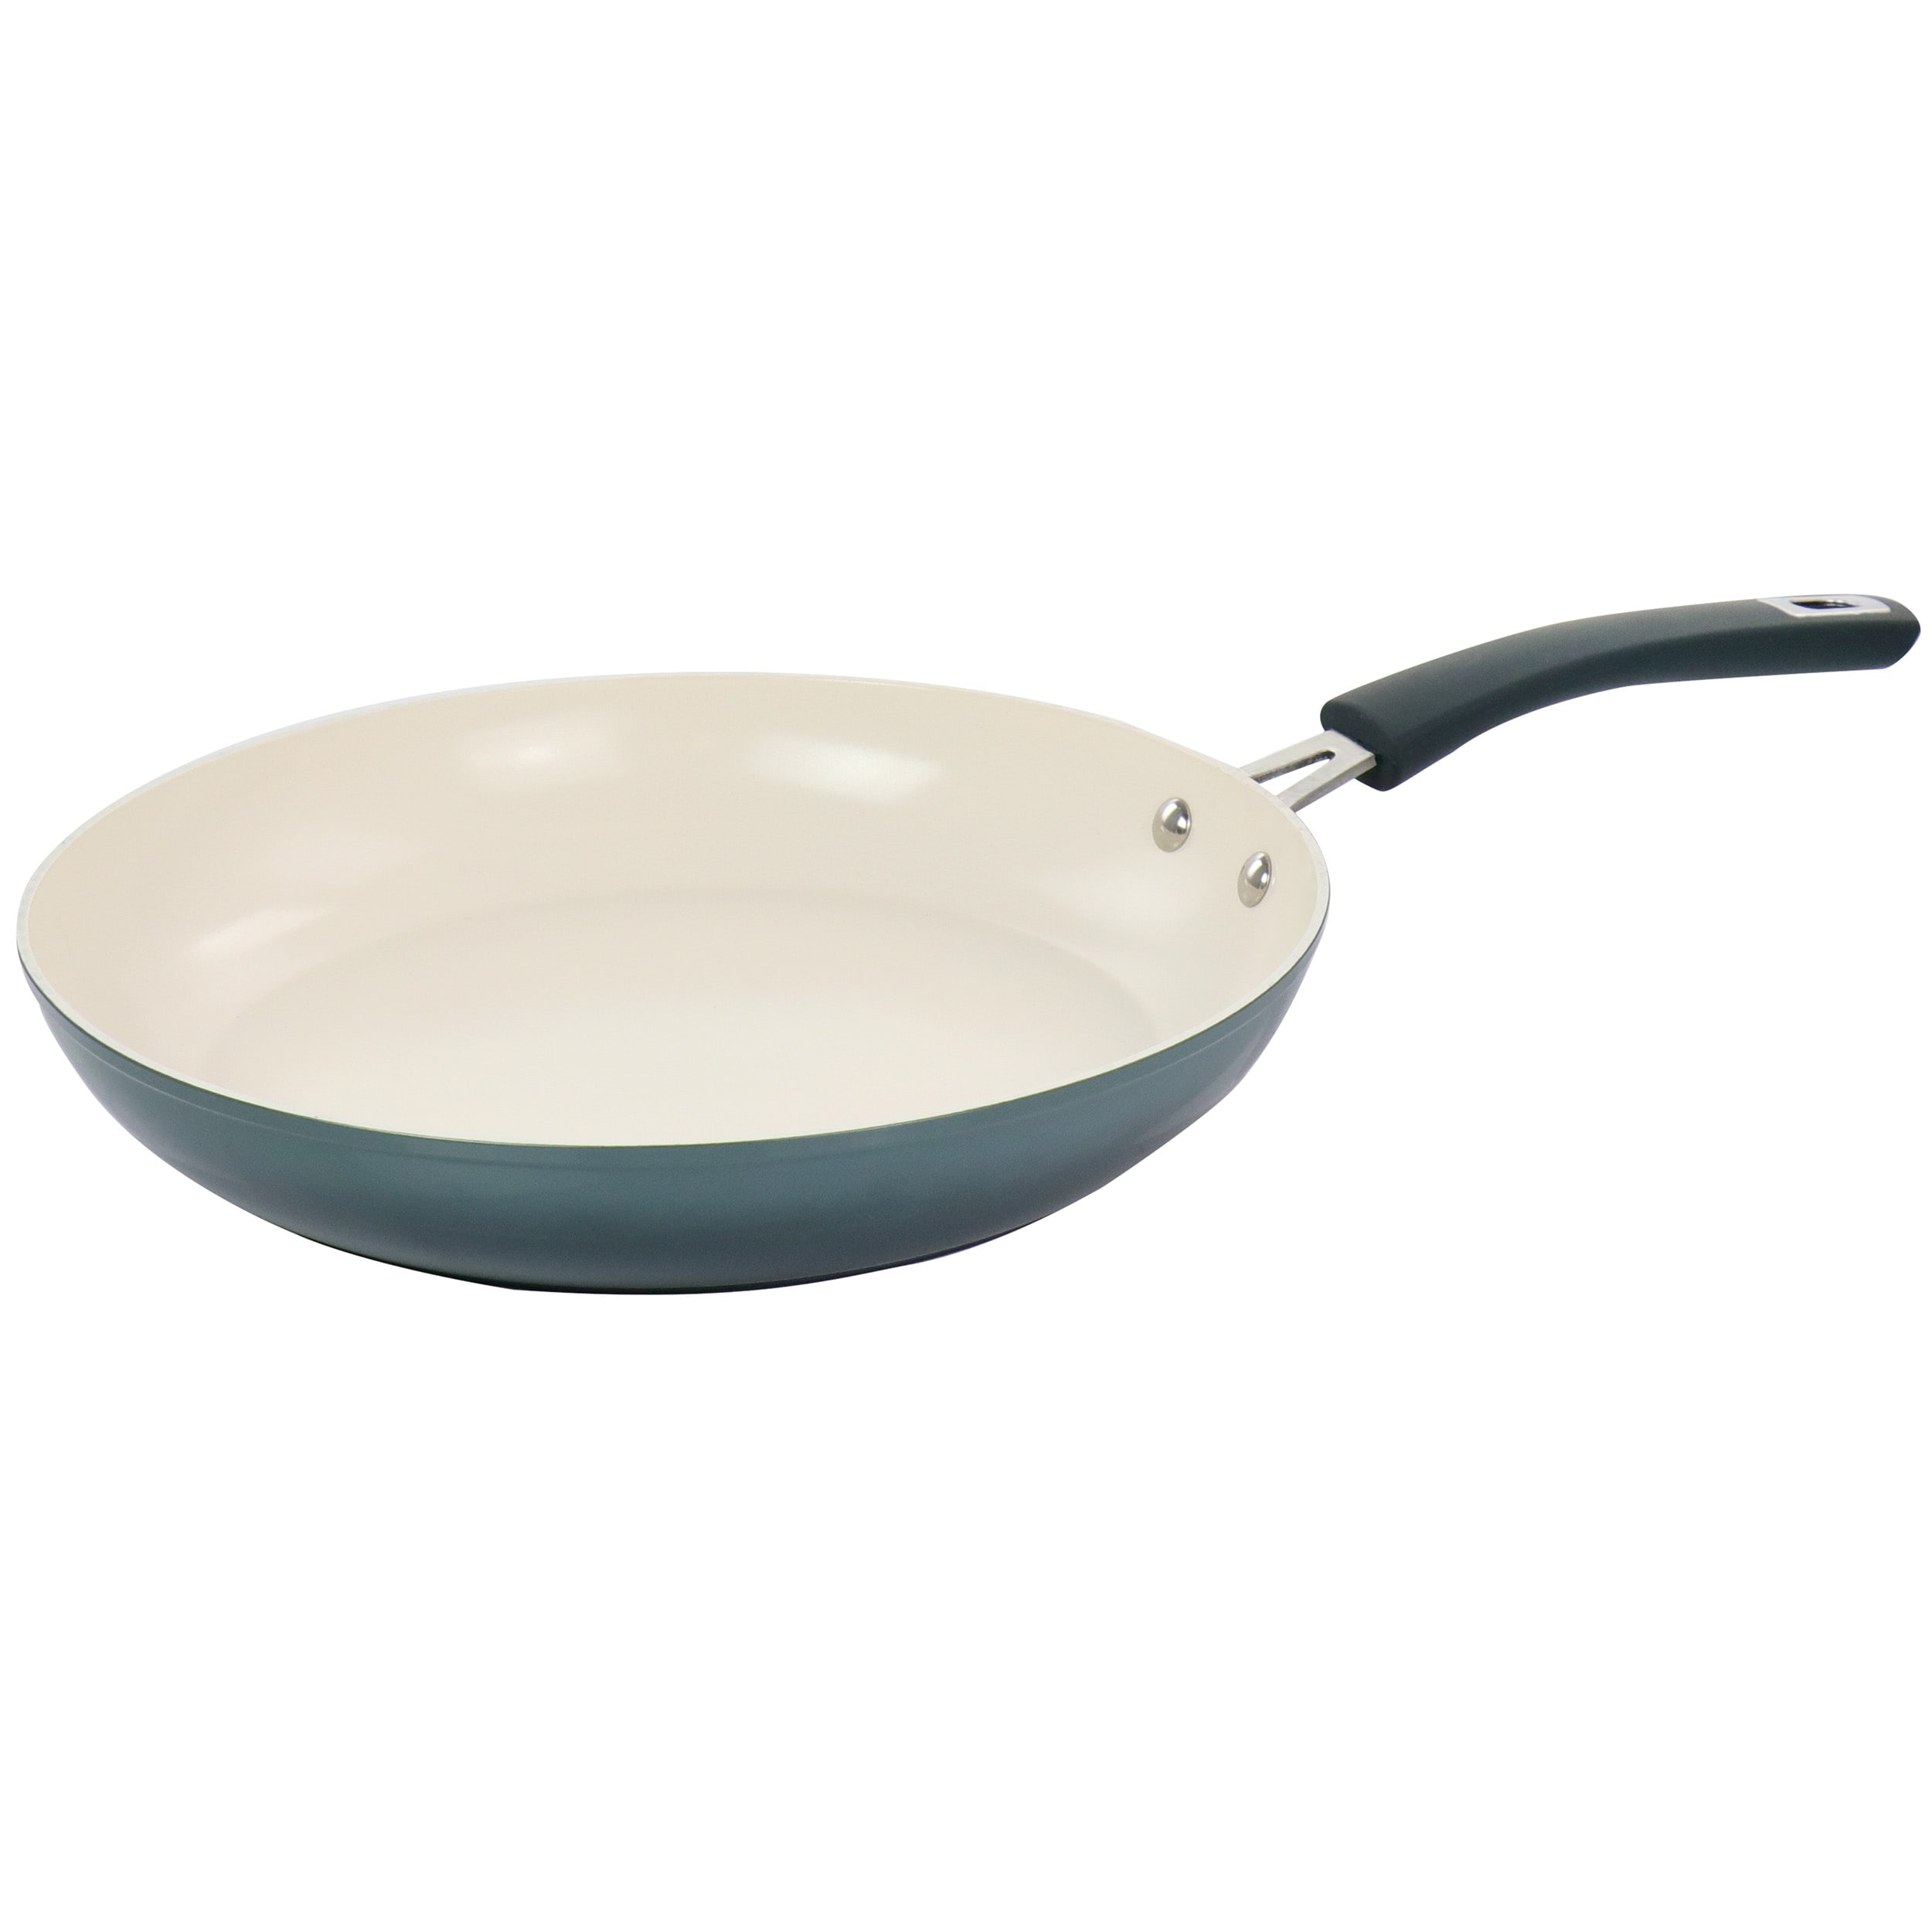 https://ak1.ostkcdn.com/images/products/is/images/direct/1a58456357ab58209e21b4e81b2fd51a71ff5767/Oster-12-Inch-Nonstick-Aluminum-Frying-Pan-in-Dark-Green.jpg